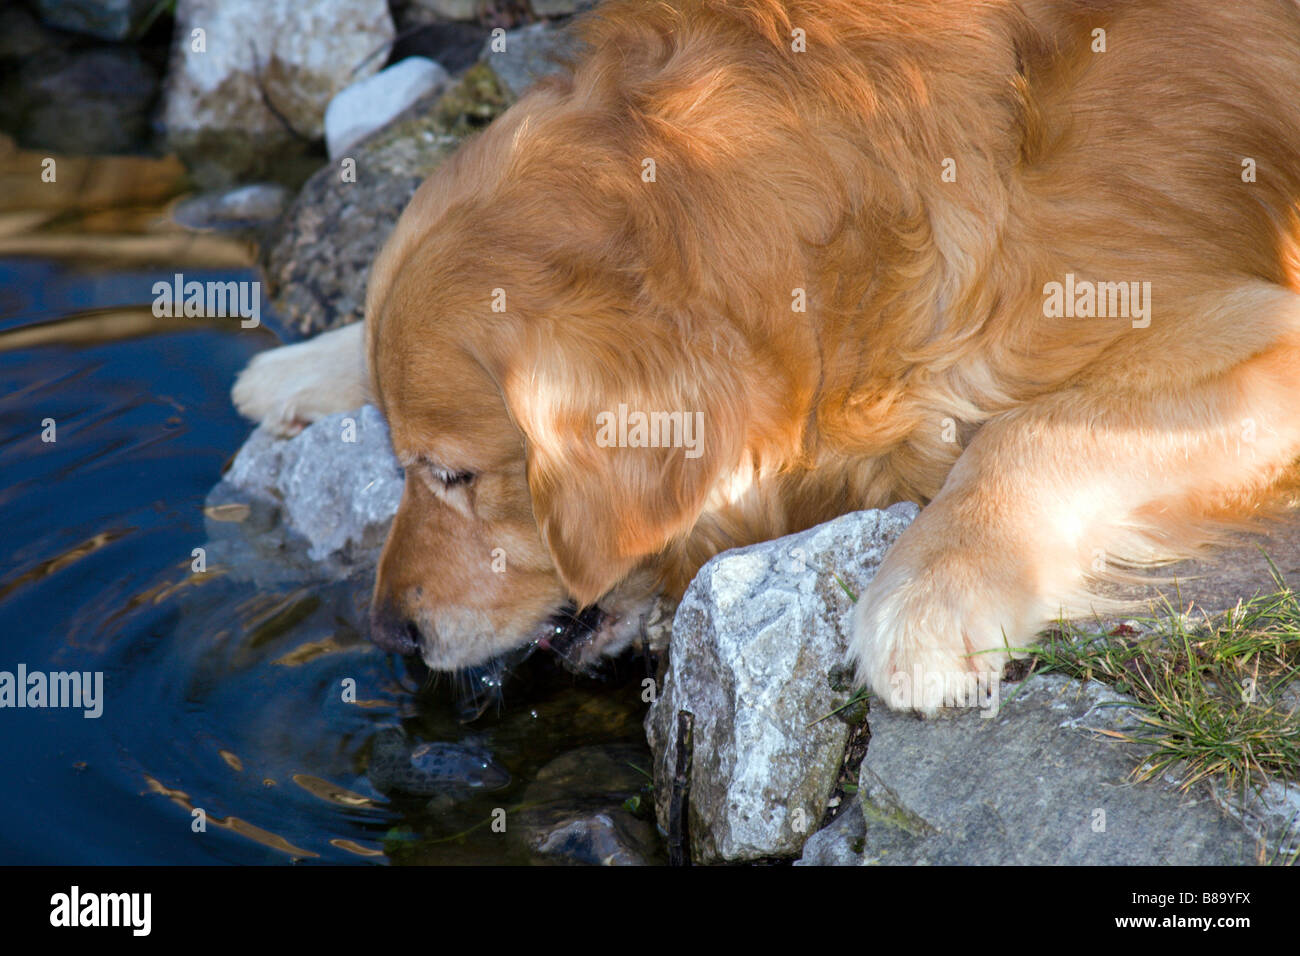 Golden retriever drinking from the pond. Stock Photo